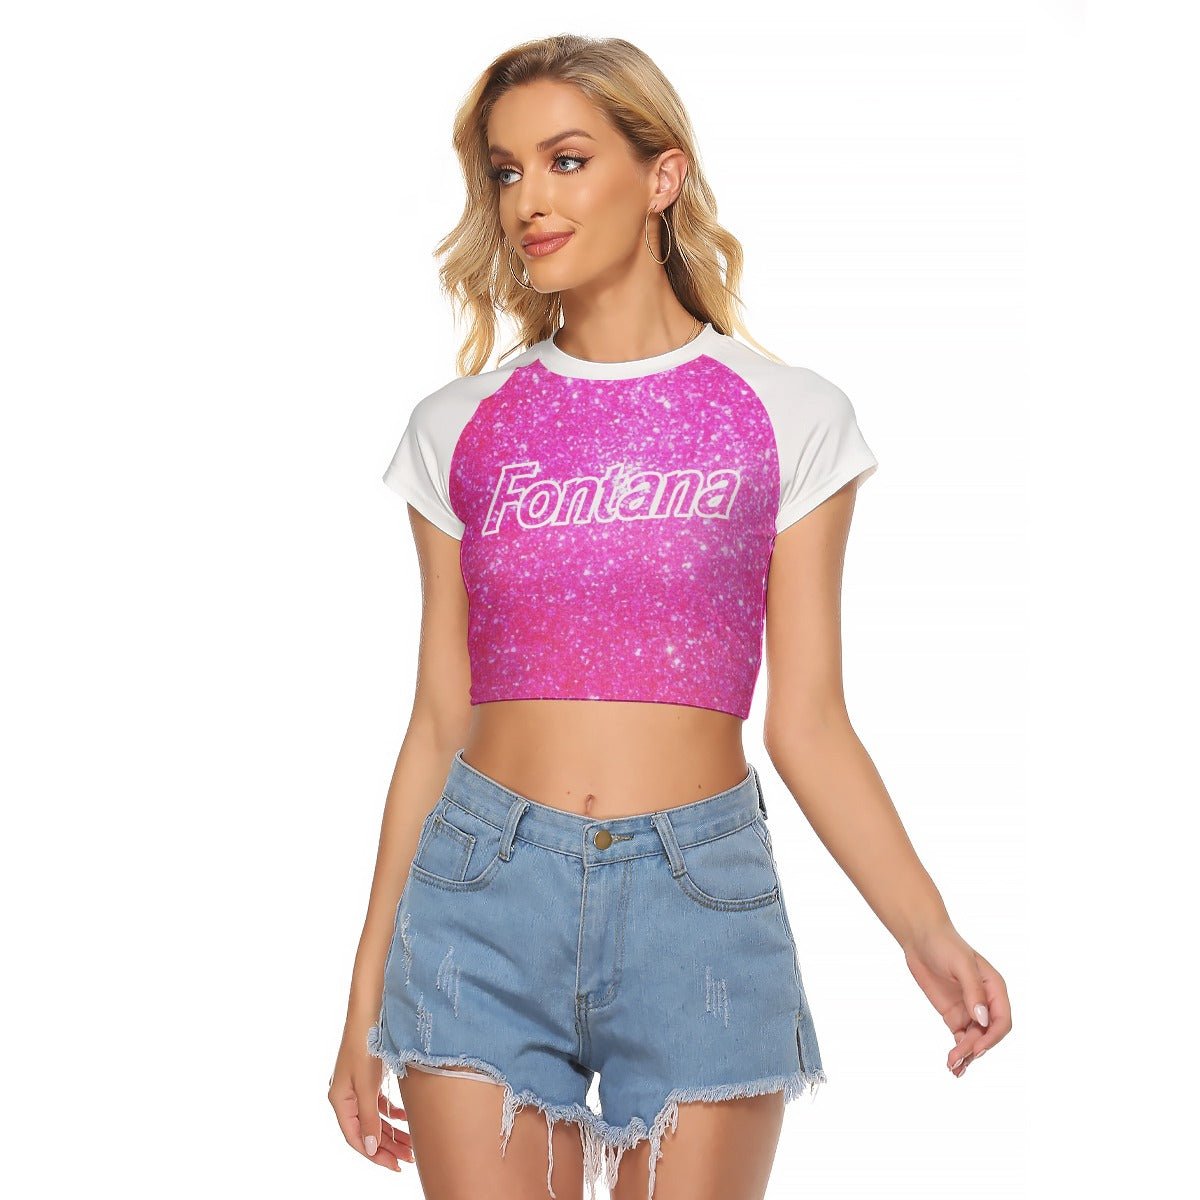 All-Over Print Women's Raglan Cropped T-shirt - dragqueenmerch